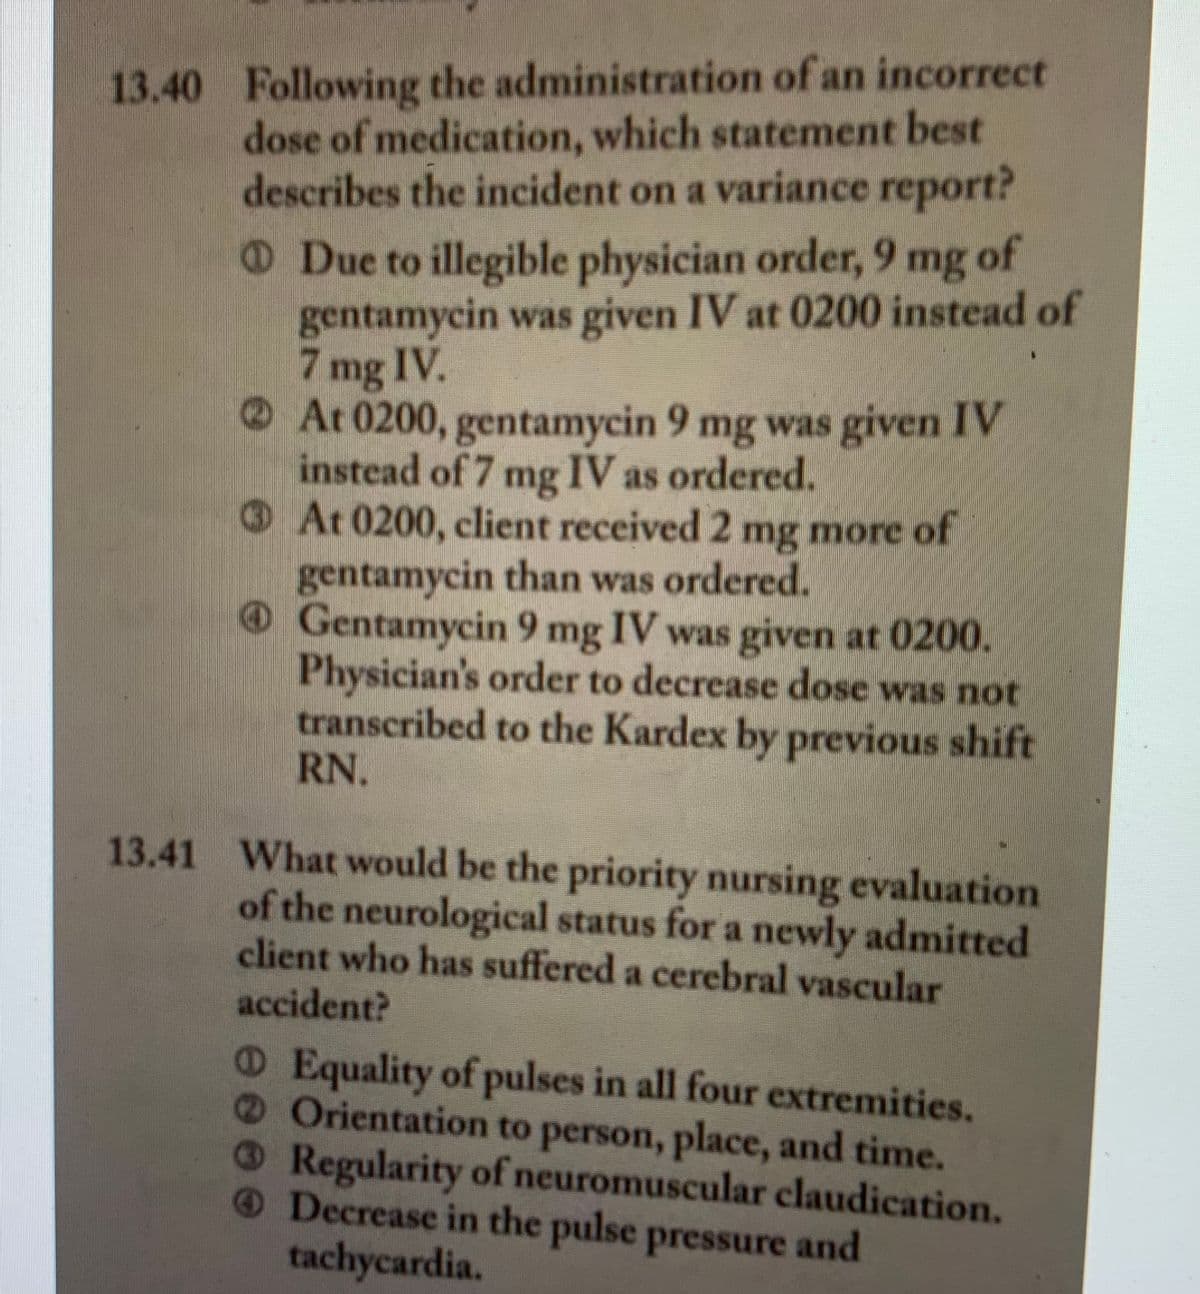 13.40 Following the administration of an incorrect
dose of medication, which statement best
describes the incident on a variance report?
Due to illegible physician order, 9 mg of
gentamycin was given IV at 0200 instead of
7 mg IV.
At 0200, gentamycin 9 mg was given IV
instead of 7 mg IV as ordered.
At 0200, client received 2 mg more of
gentamycin than was ordered.
Gentamycin 9 mg IV was given at 0200.
Physician's order to decrease dose was not
transcribed to the Kardex by previous shift
RN.
13.41 What would be the priority nursing evaluation
of the neurological status for a newly admitted
client who has suffered a cerebral vascular
accident?
O Equality of pulses in all four extremities.
Orientation to person, place, and time.
Regularity of neuromuscular claudication.
Decrease in the pulse pressure and
tachycardia.